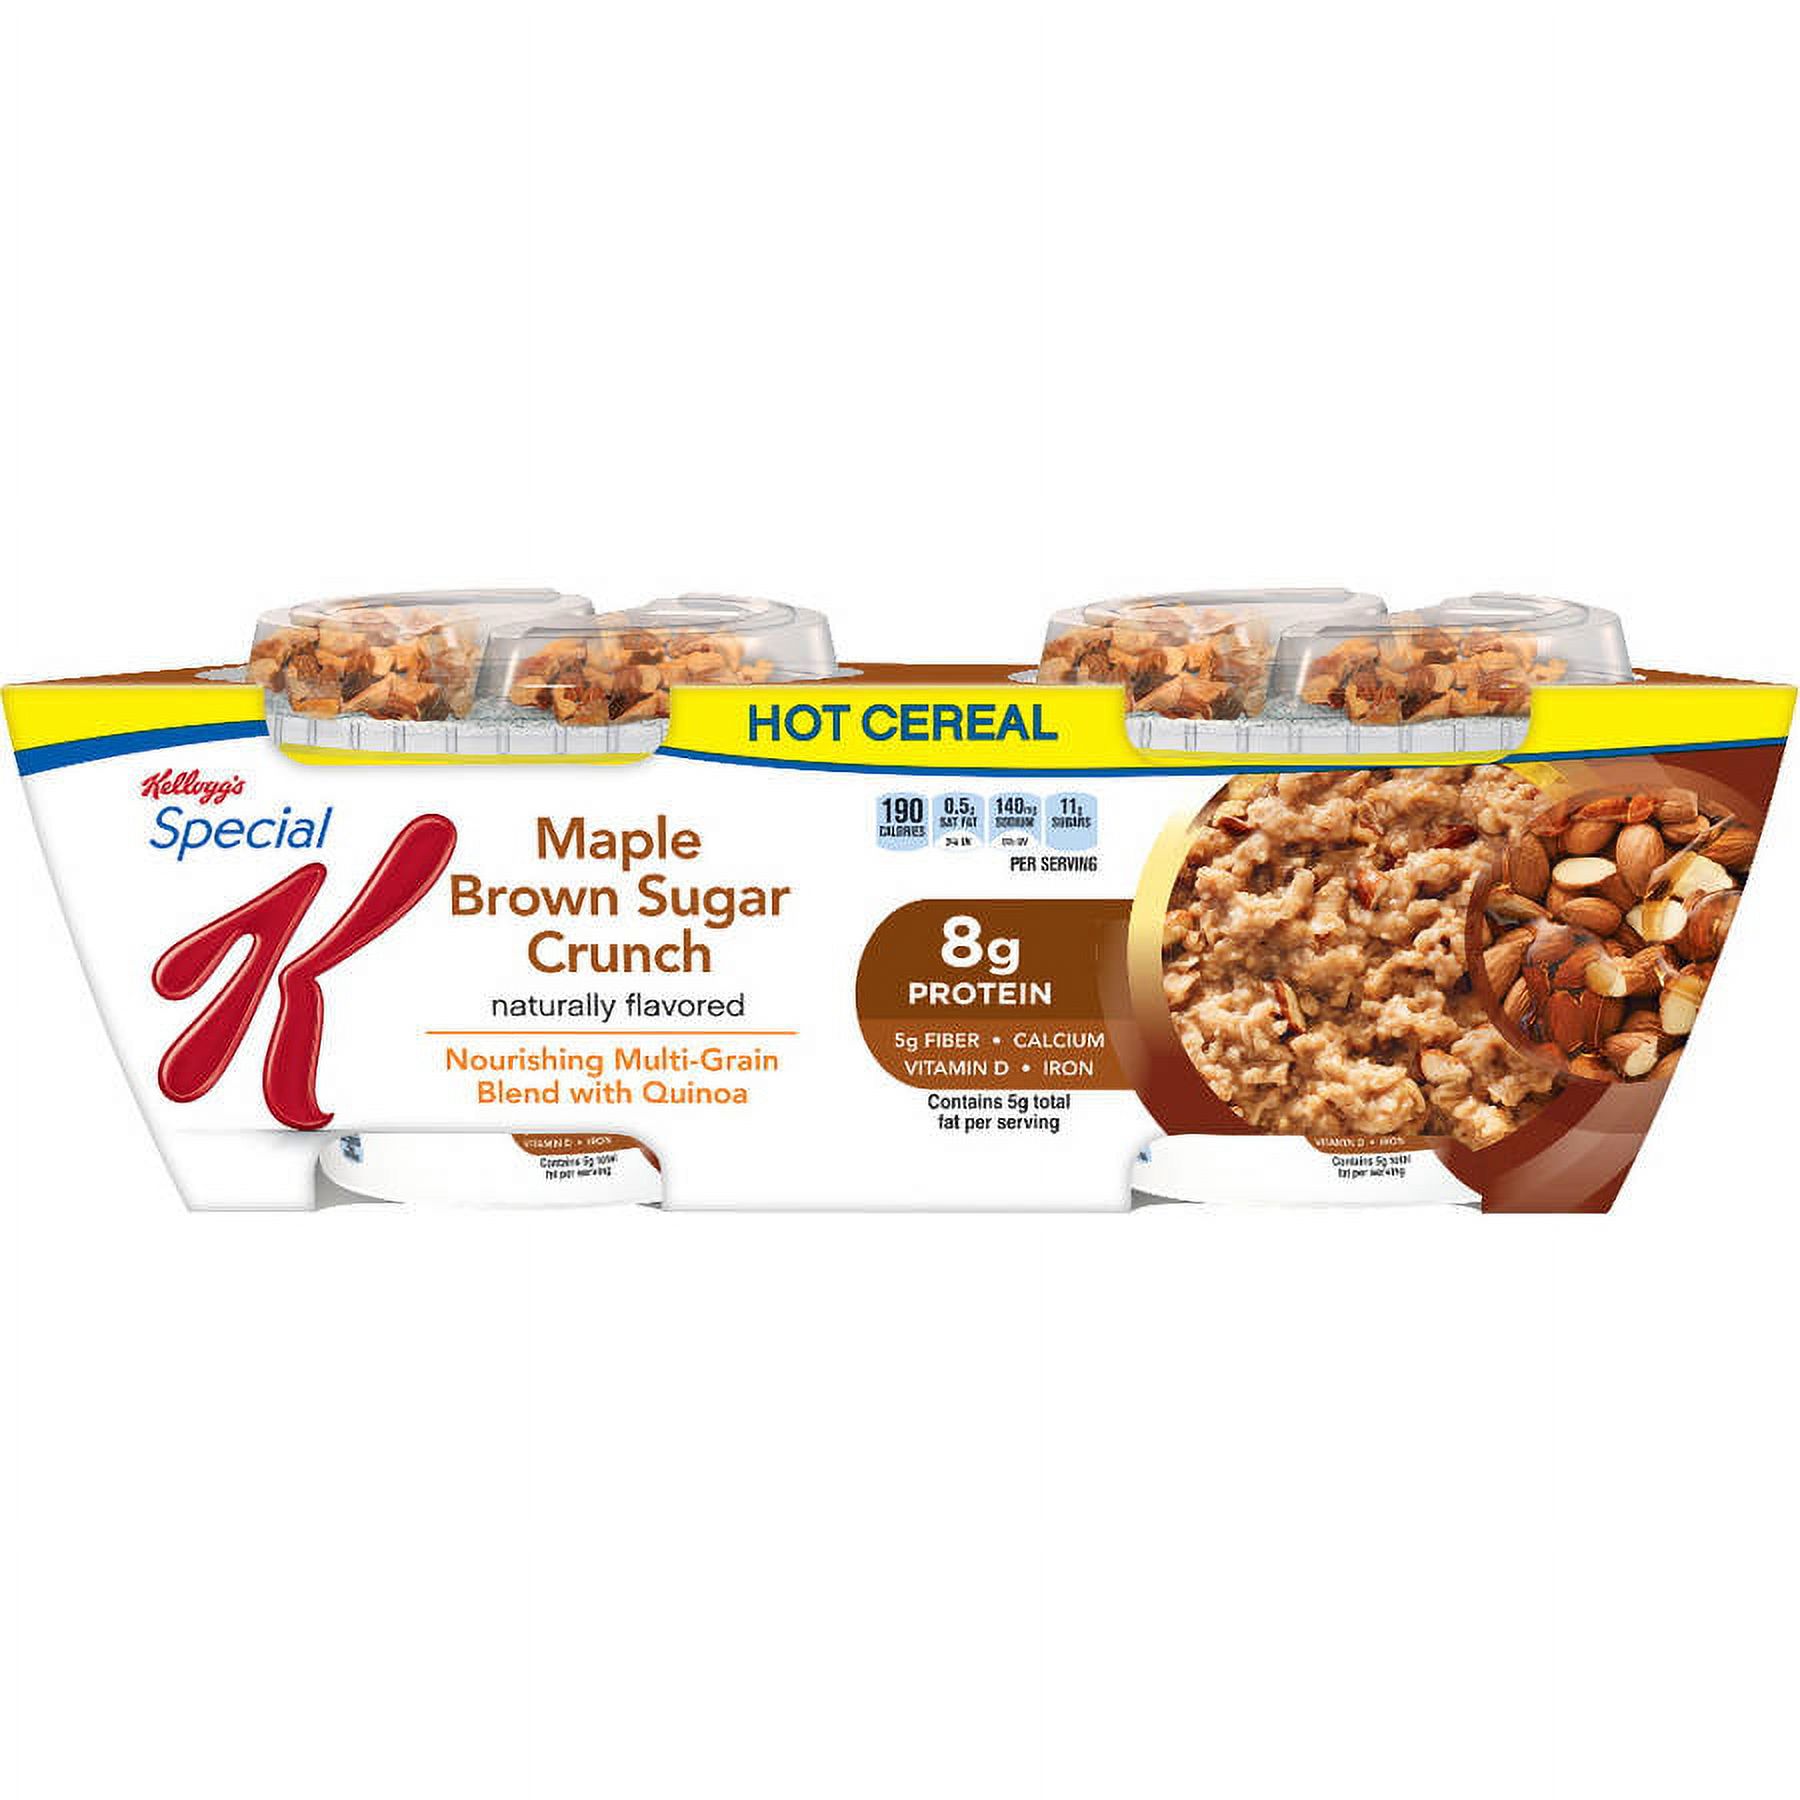 Kellogg's Special K Maple Brown Sugar Crunch Hot Cereal, 1.83 oz, 2 ct - image 3 of 5